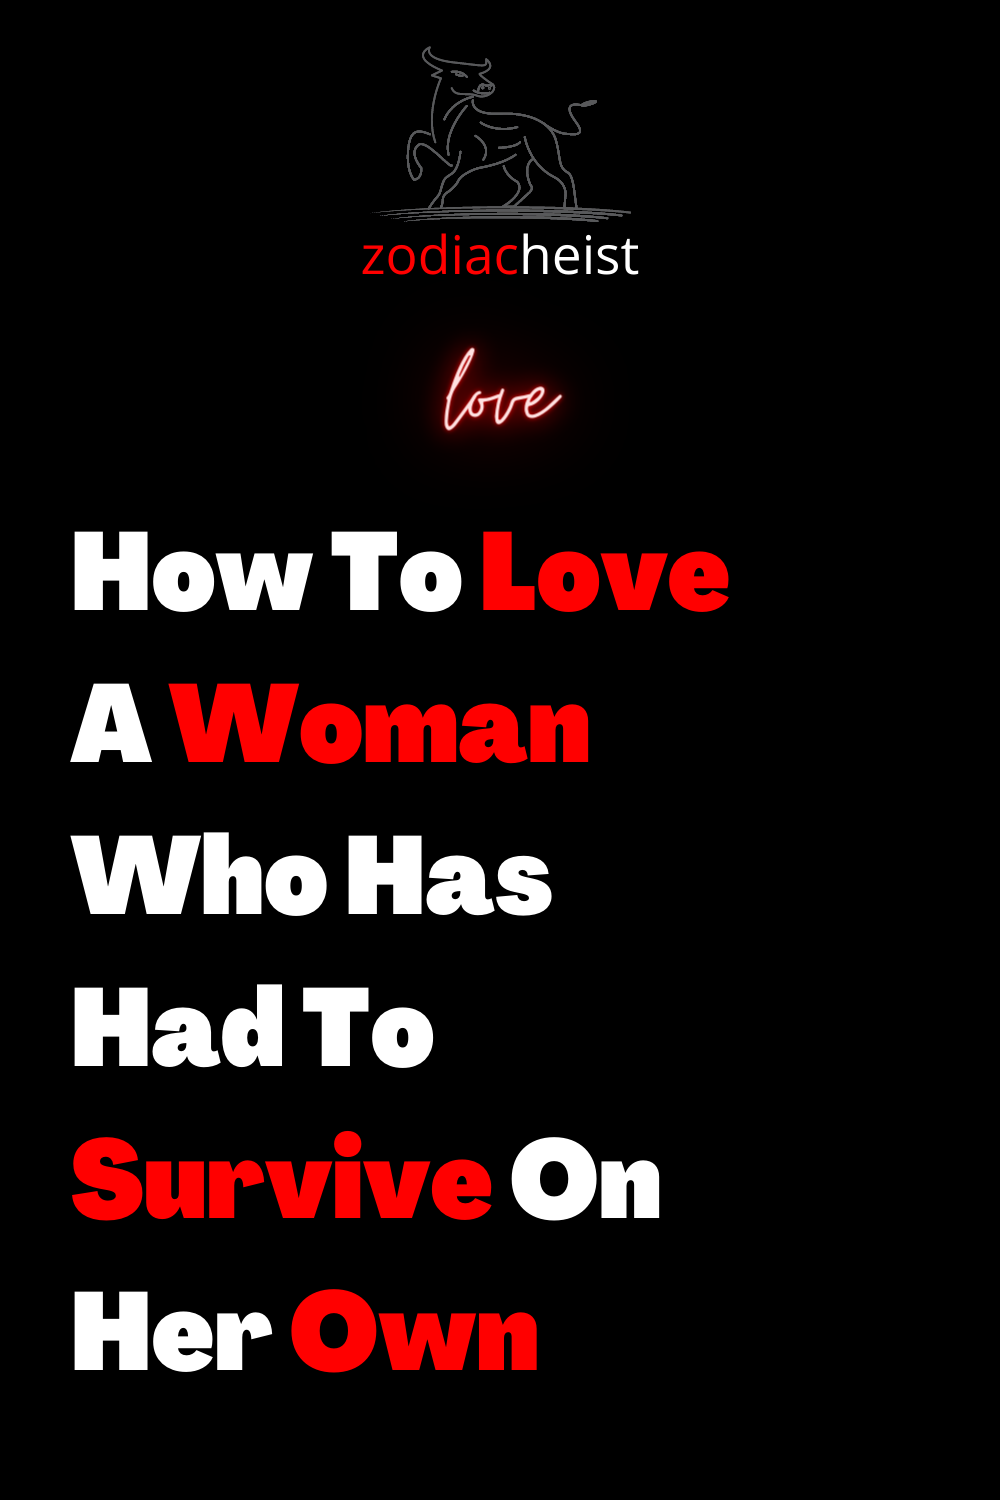 How To Love A Woman Who Has Had To Survive On Her Own